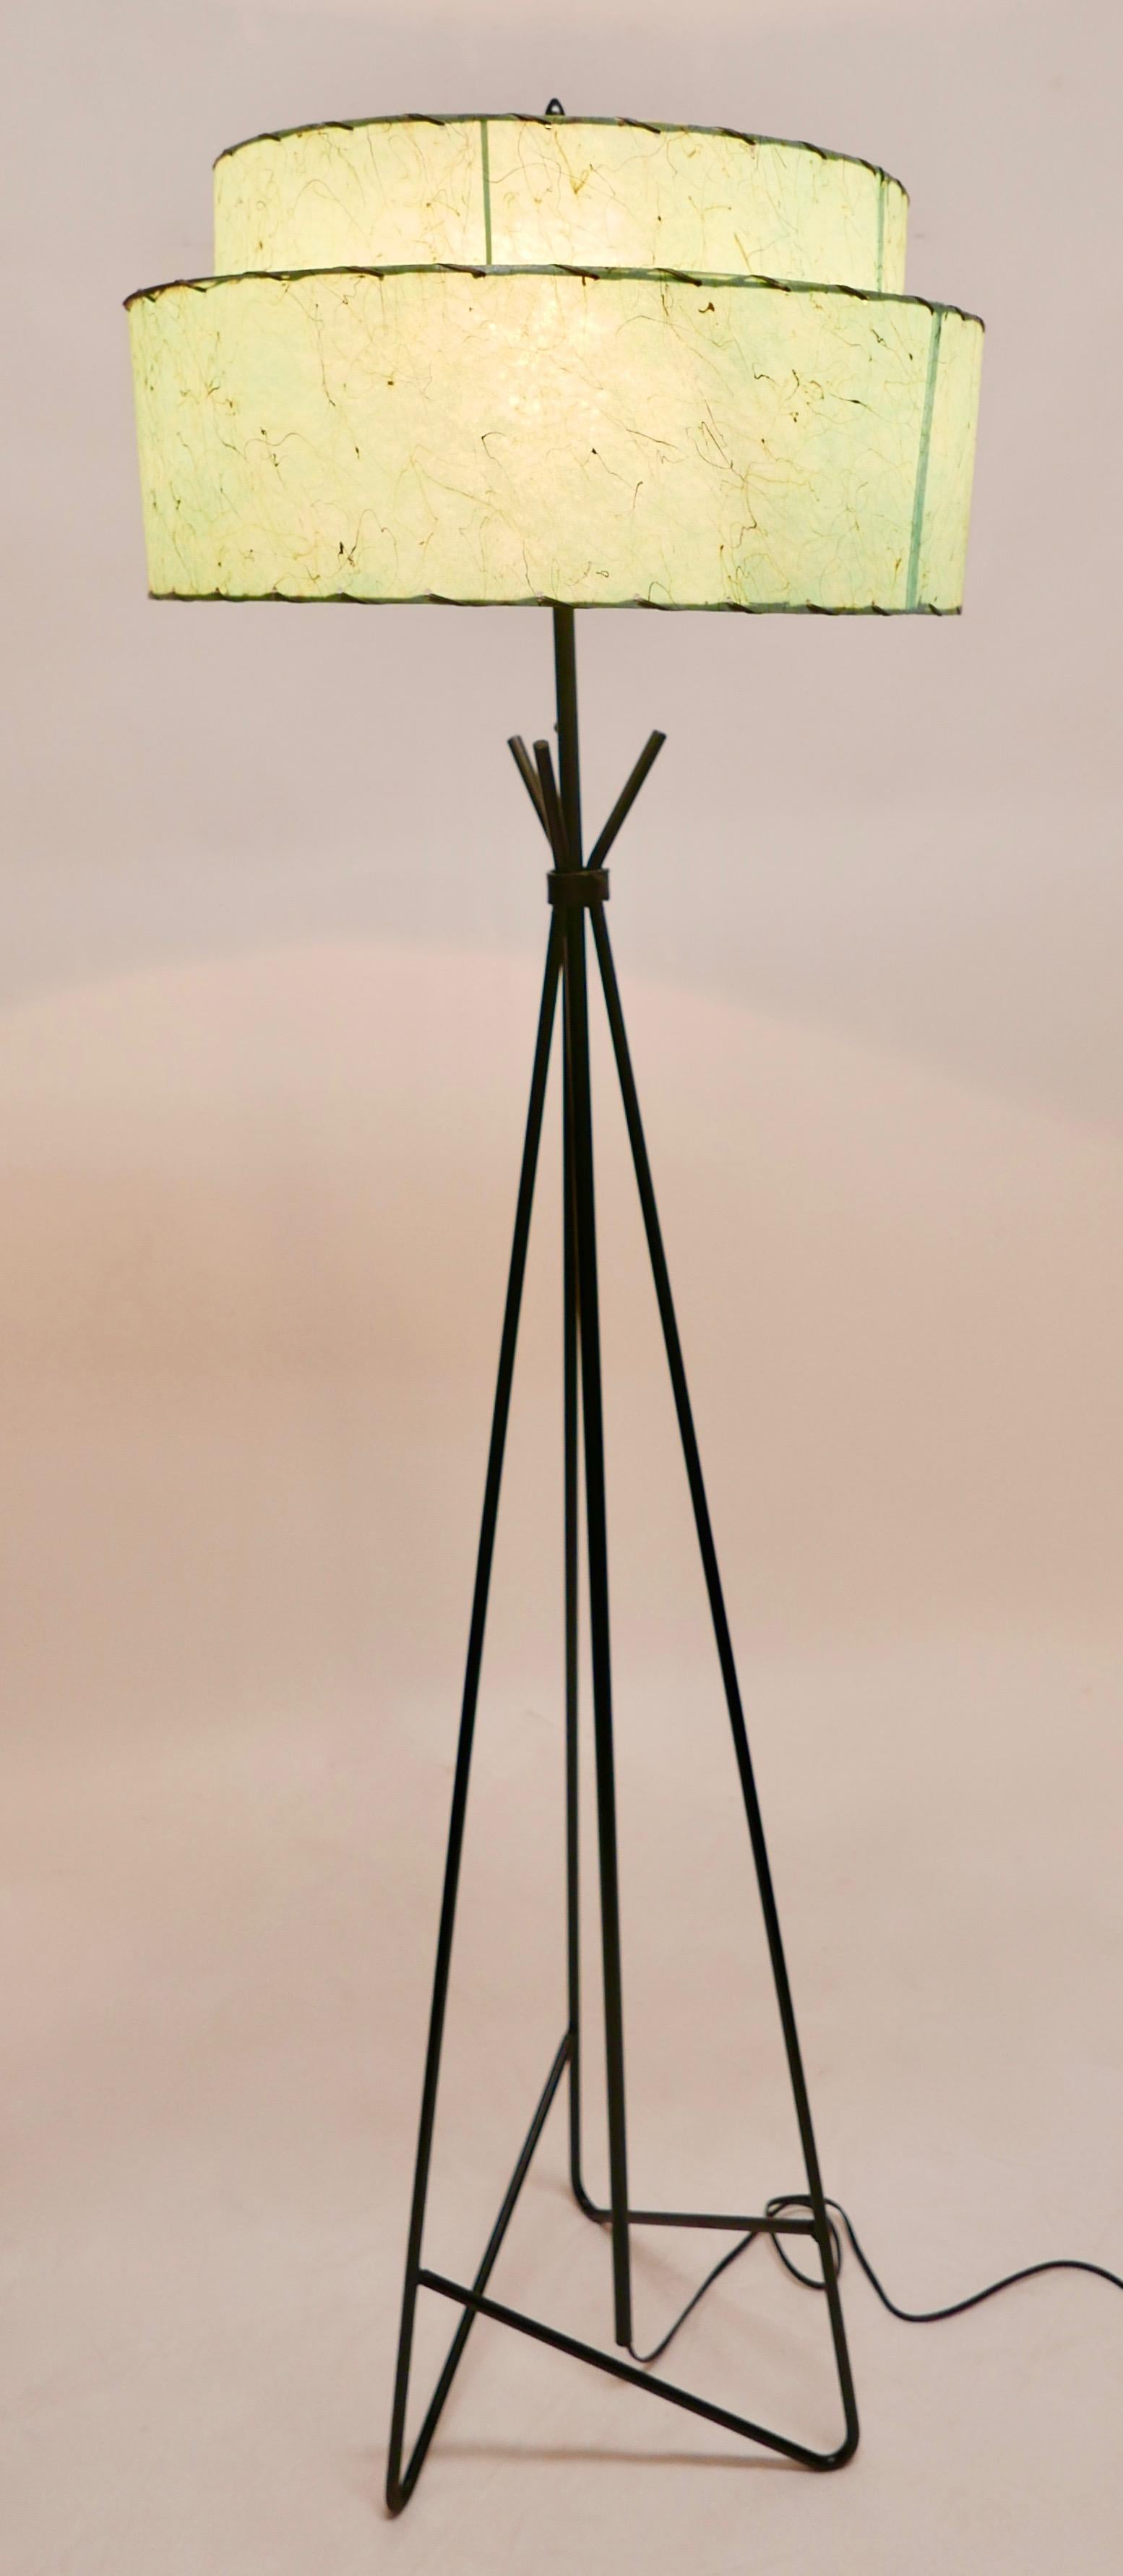 Mid-20th Century American Mid-Century Modern Period Floor Lamp with Original Whip-Stitched Shade